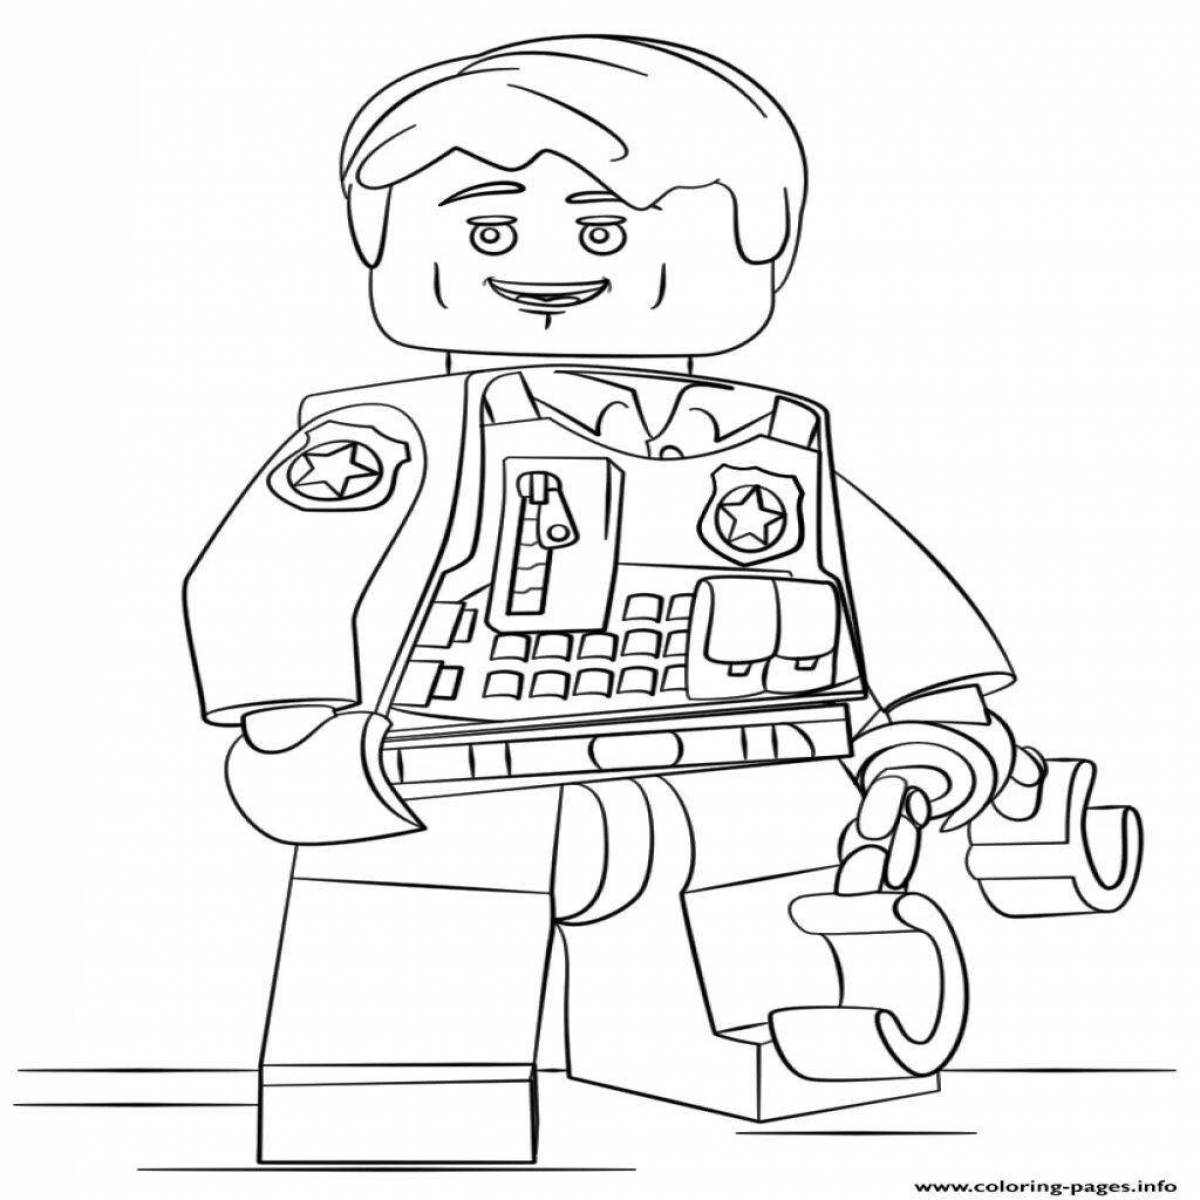 Lego toy soldiers fun coloring book